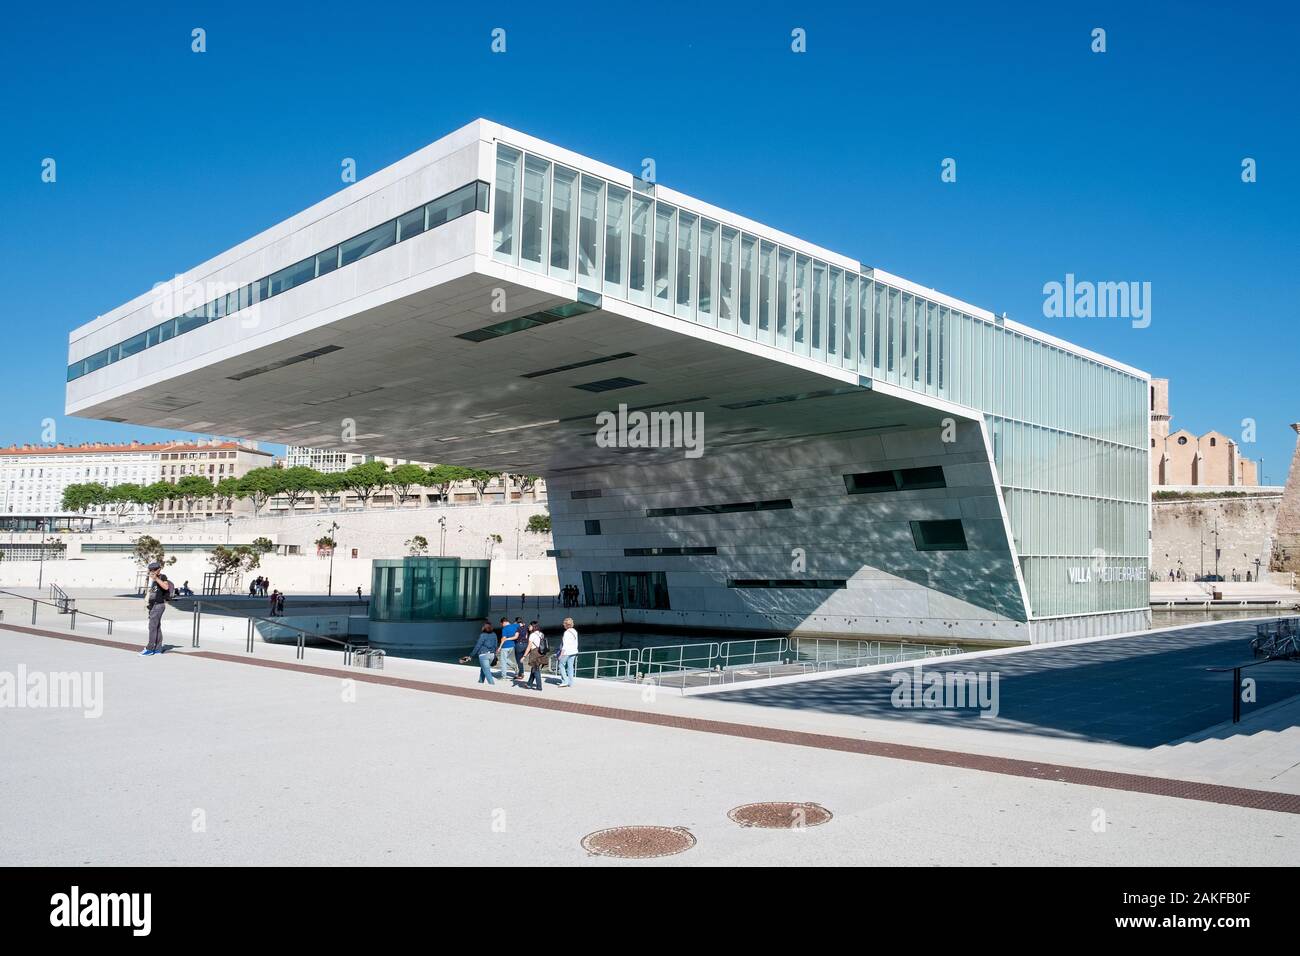 MARSEILLE, FRANCE - MAY 17, 2015: A view of the Villa Mediterranee building, a congress center, in Marseille, France, at the Promenade Robert-Laffont, Stock Photo